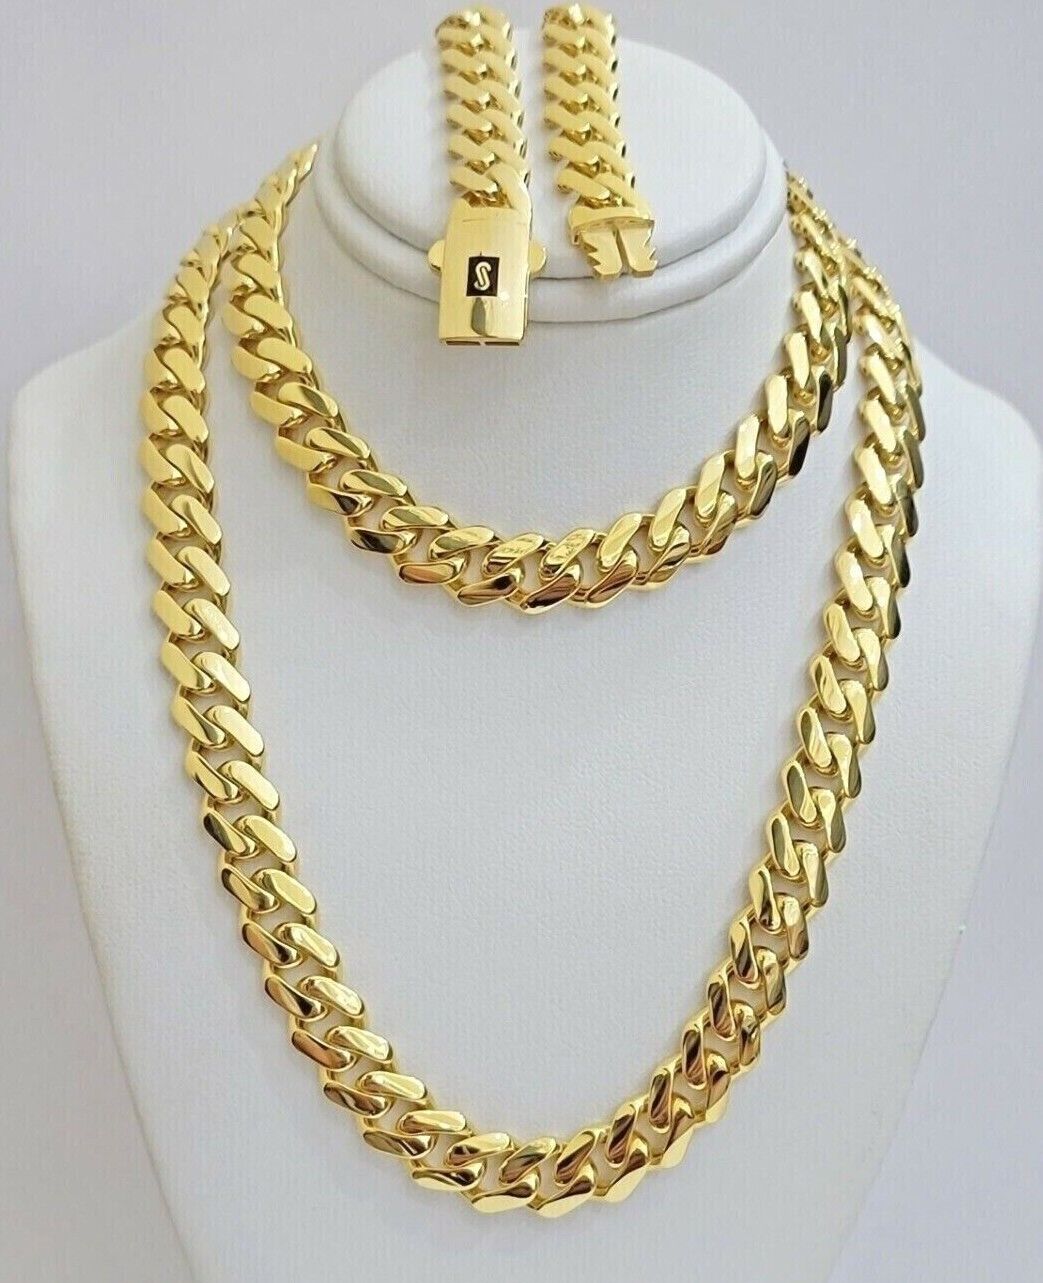 10k Yellow Gold Miami Cuban Royal Monaco Curb Link Chain 9mm Necklace 24" REAL